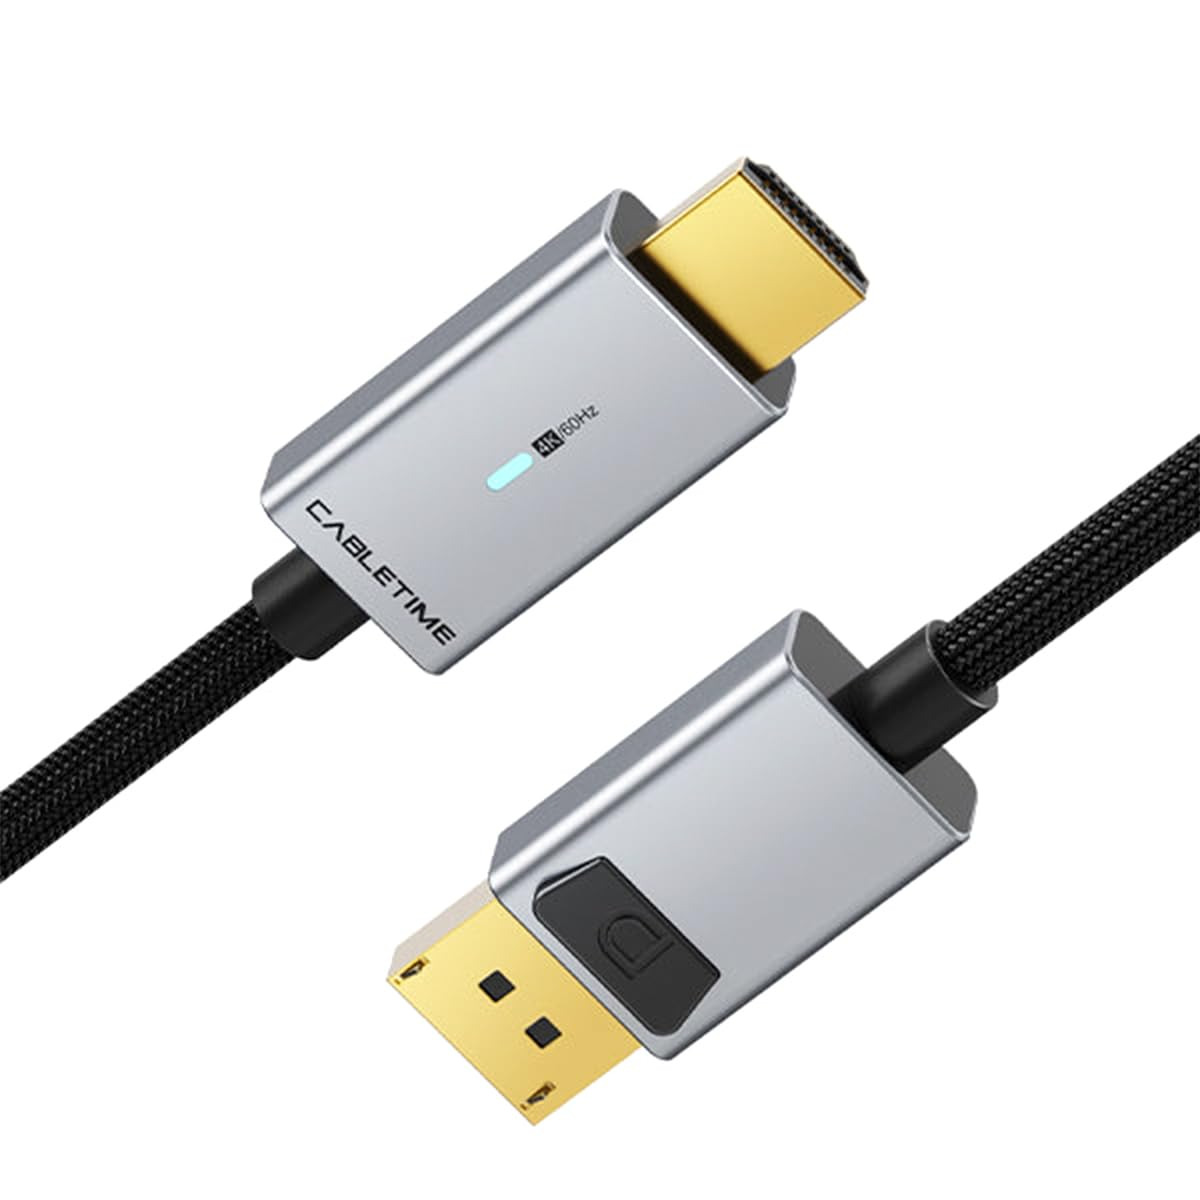 DisplayPort To HDMI Male To Male Cable 4K 60Hz,Supports up to 4K@60Hz